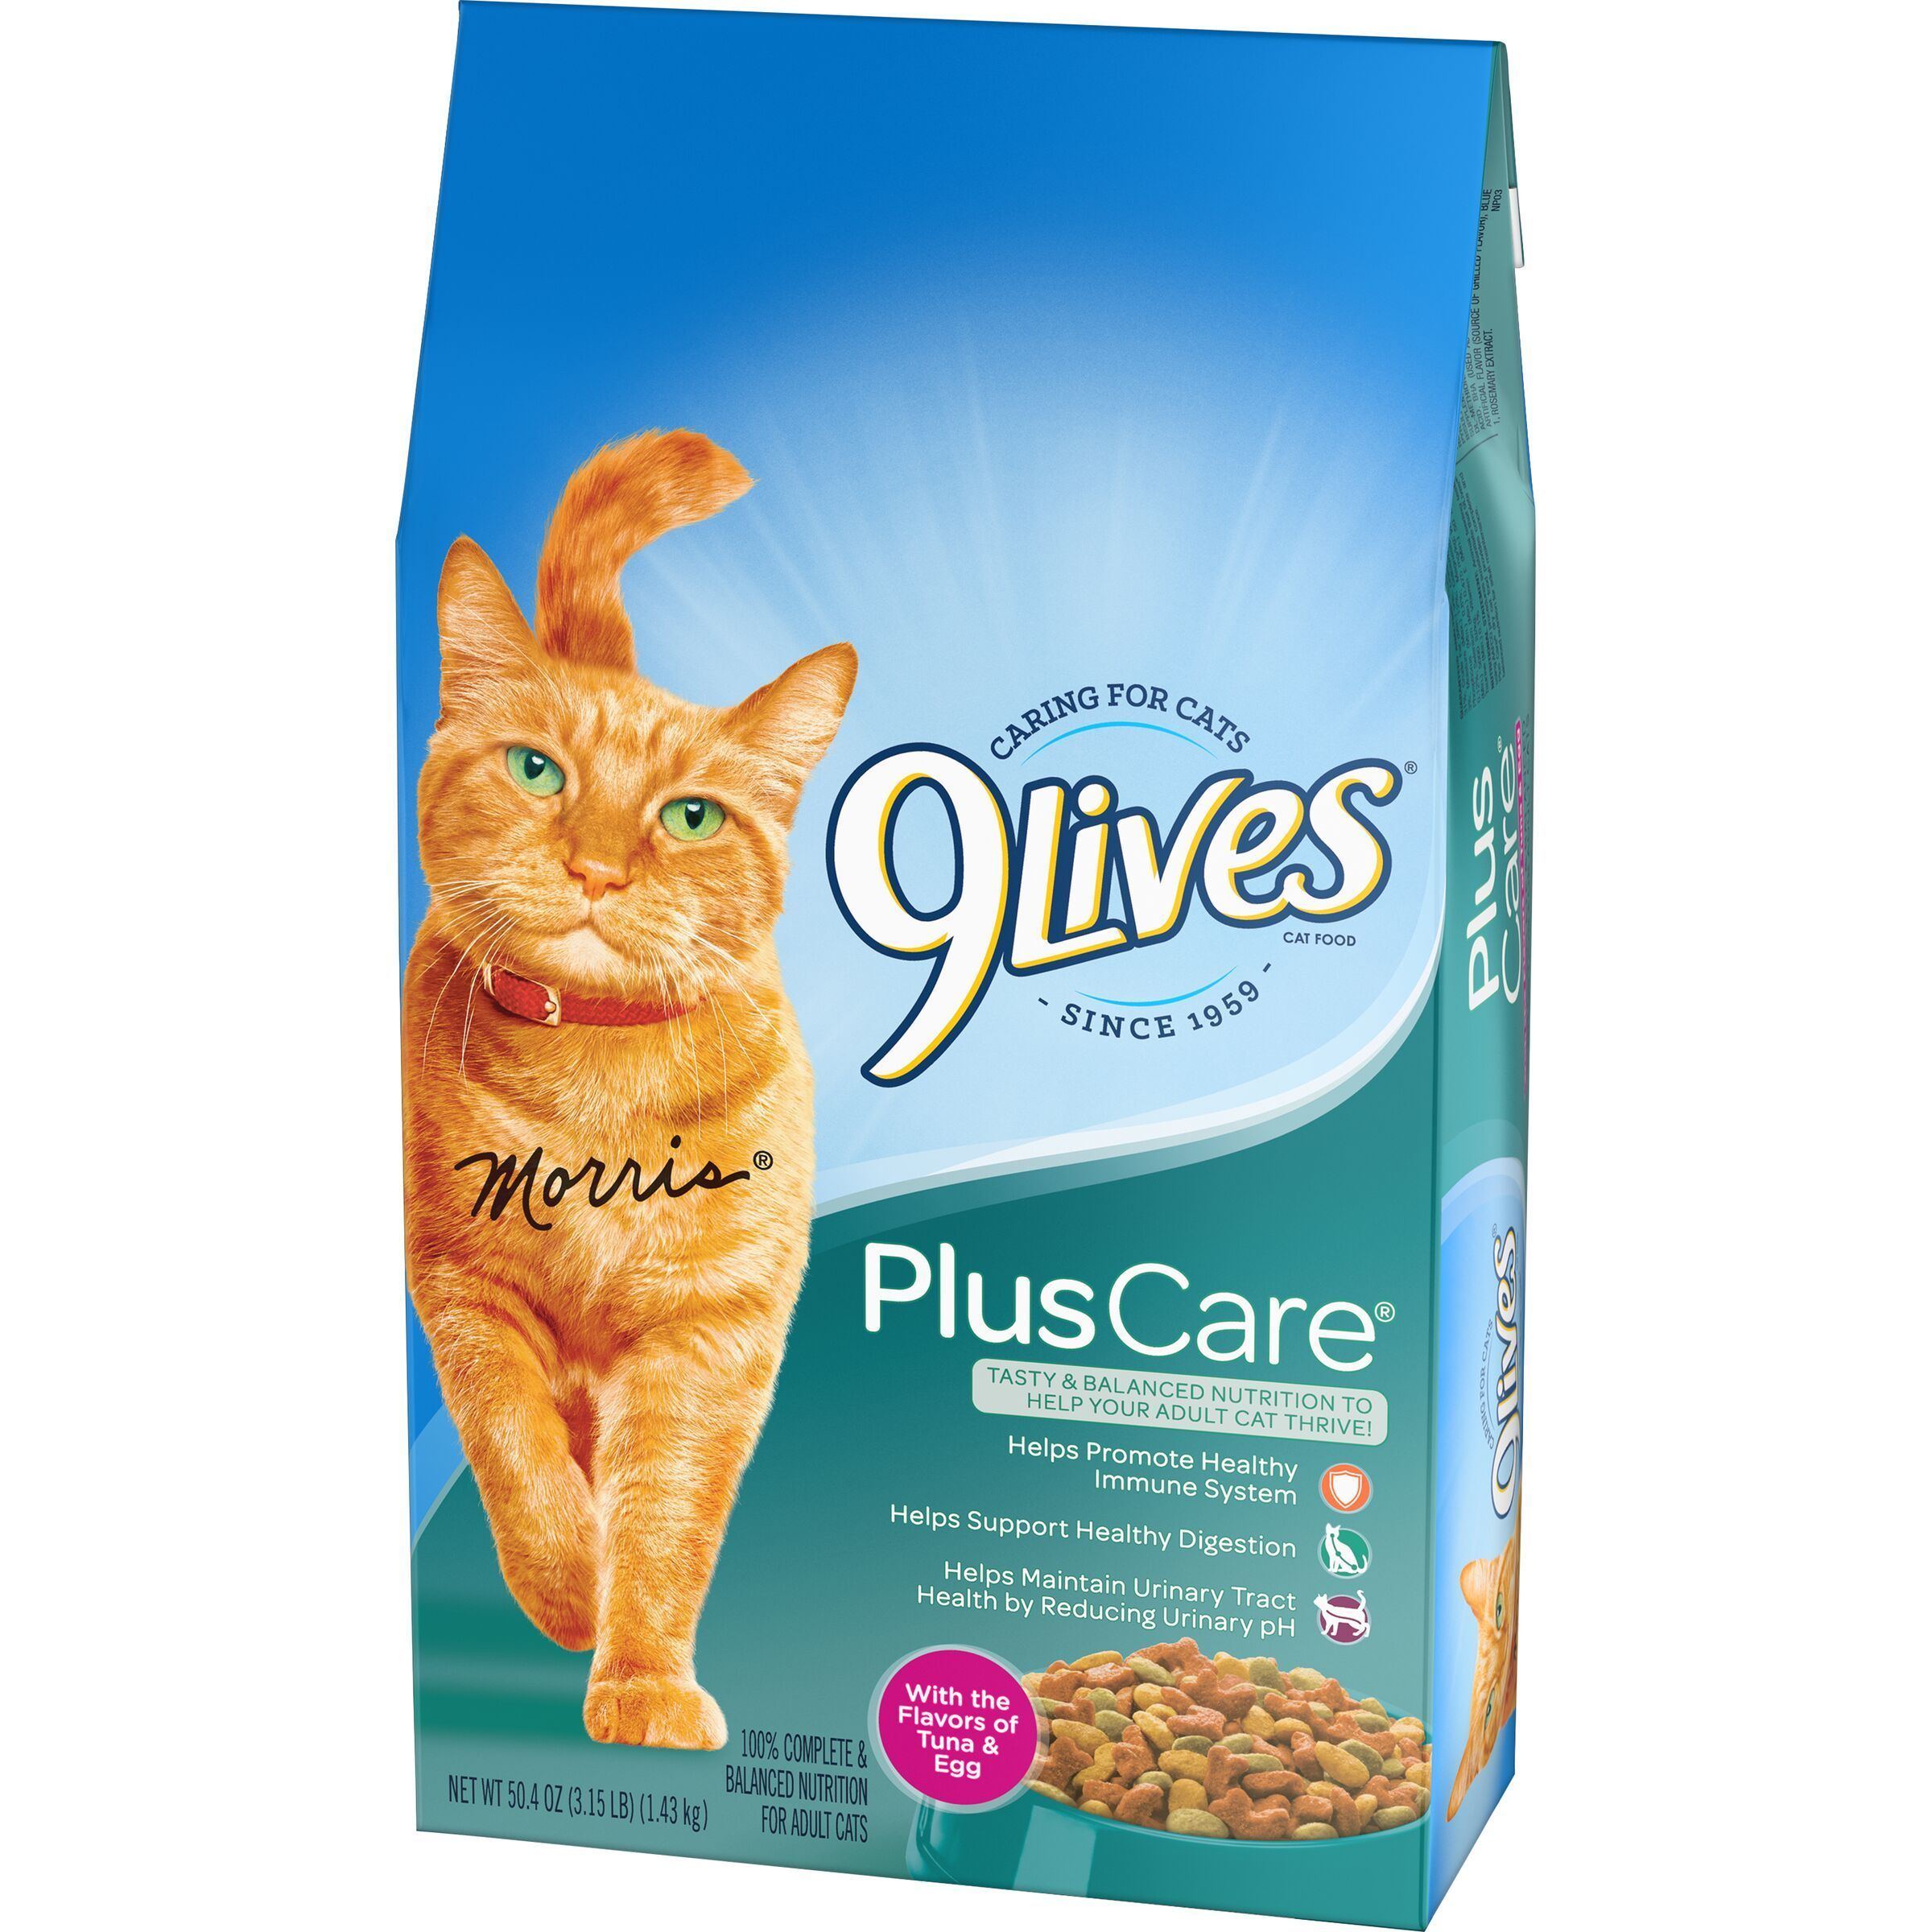 Flurry reccomend Dads adult cat food